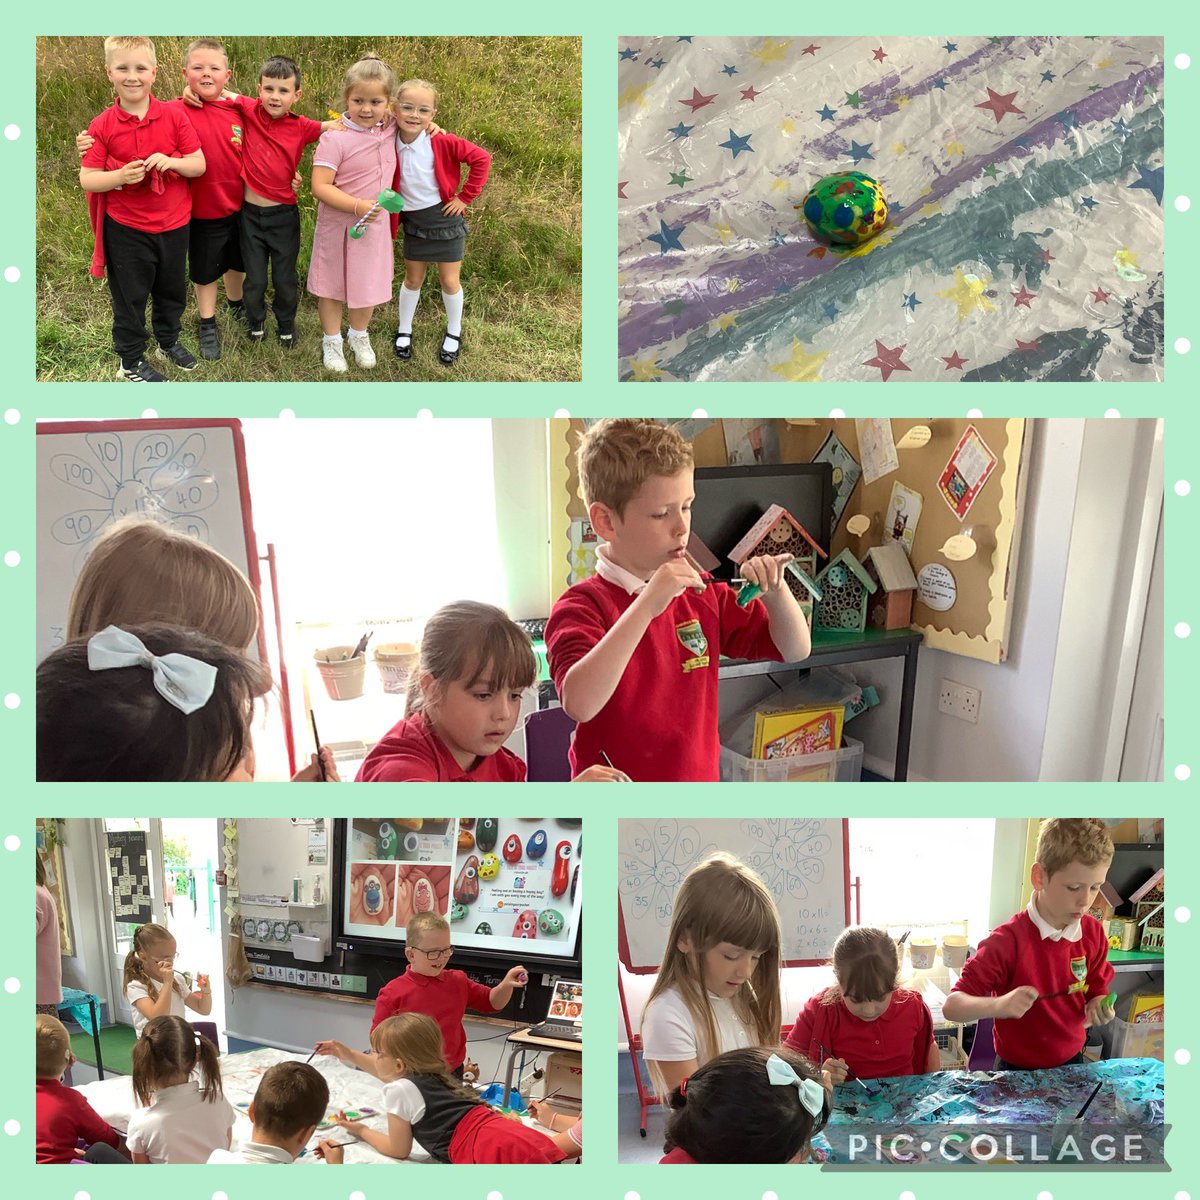 @garntegprimary @MissZWilliams12 we had such a fun and creative move up day ready for dosbarth 6 in September! The children were busy with lots of arts and craft, along with a STEM activity creating their own flying models!